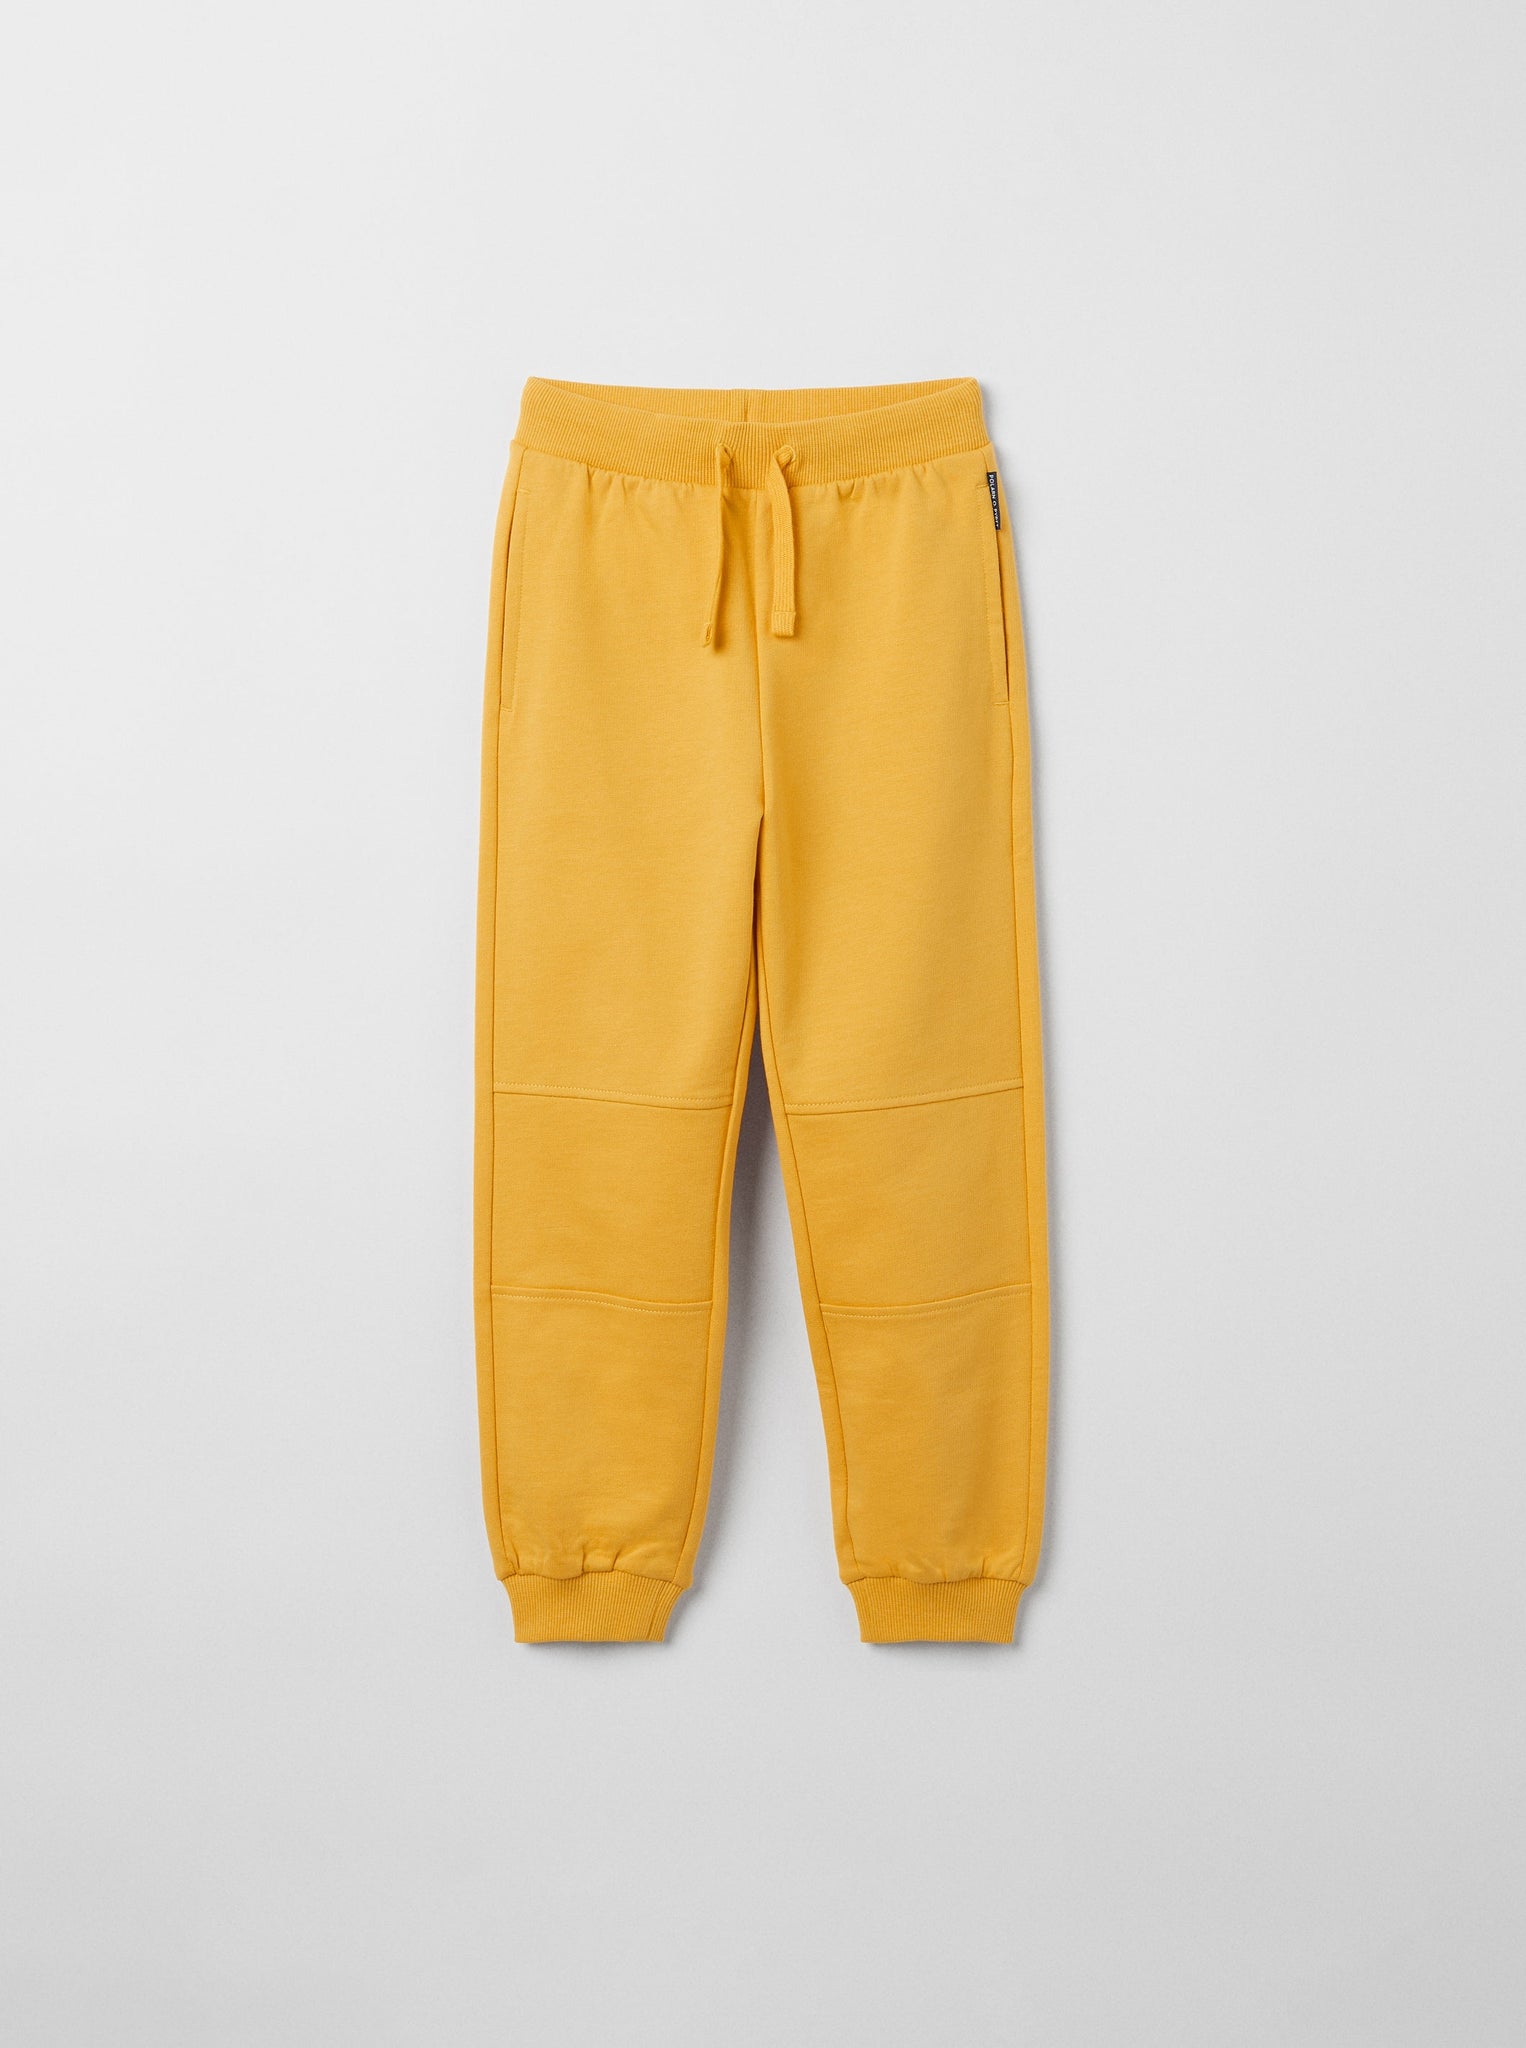 Organic Cotton Yellow Kids Joggers from the Polarn O. Pyret kidswear collection. The best ethical kids clothes